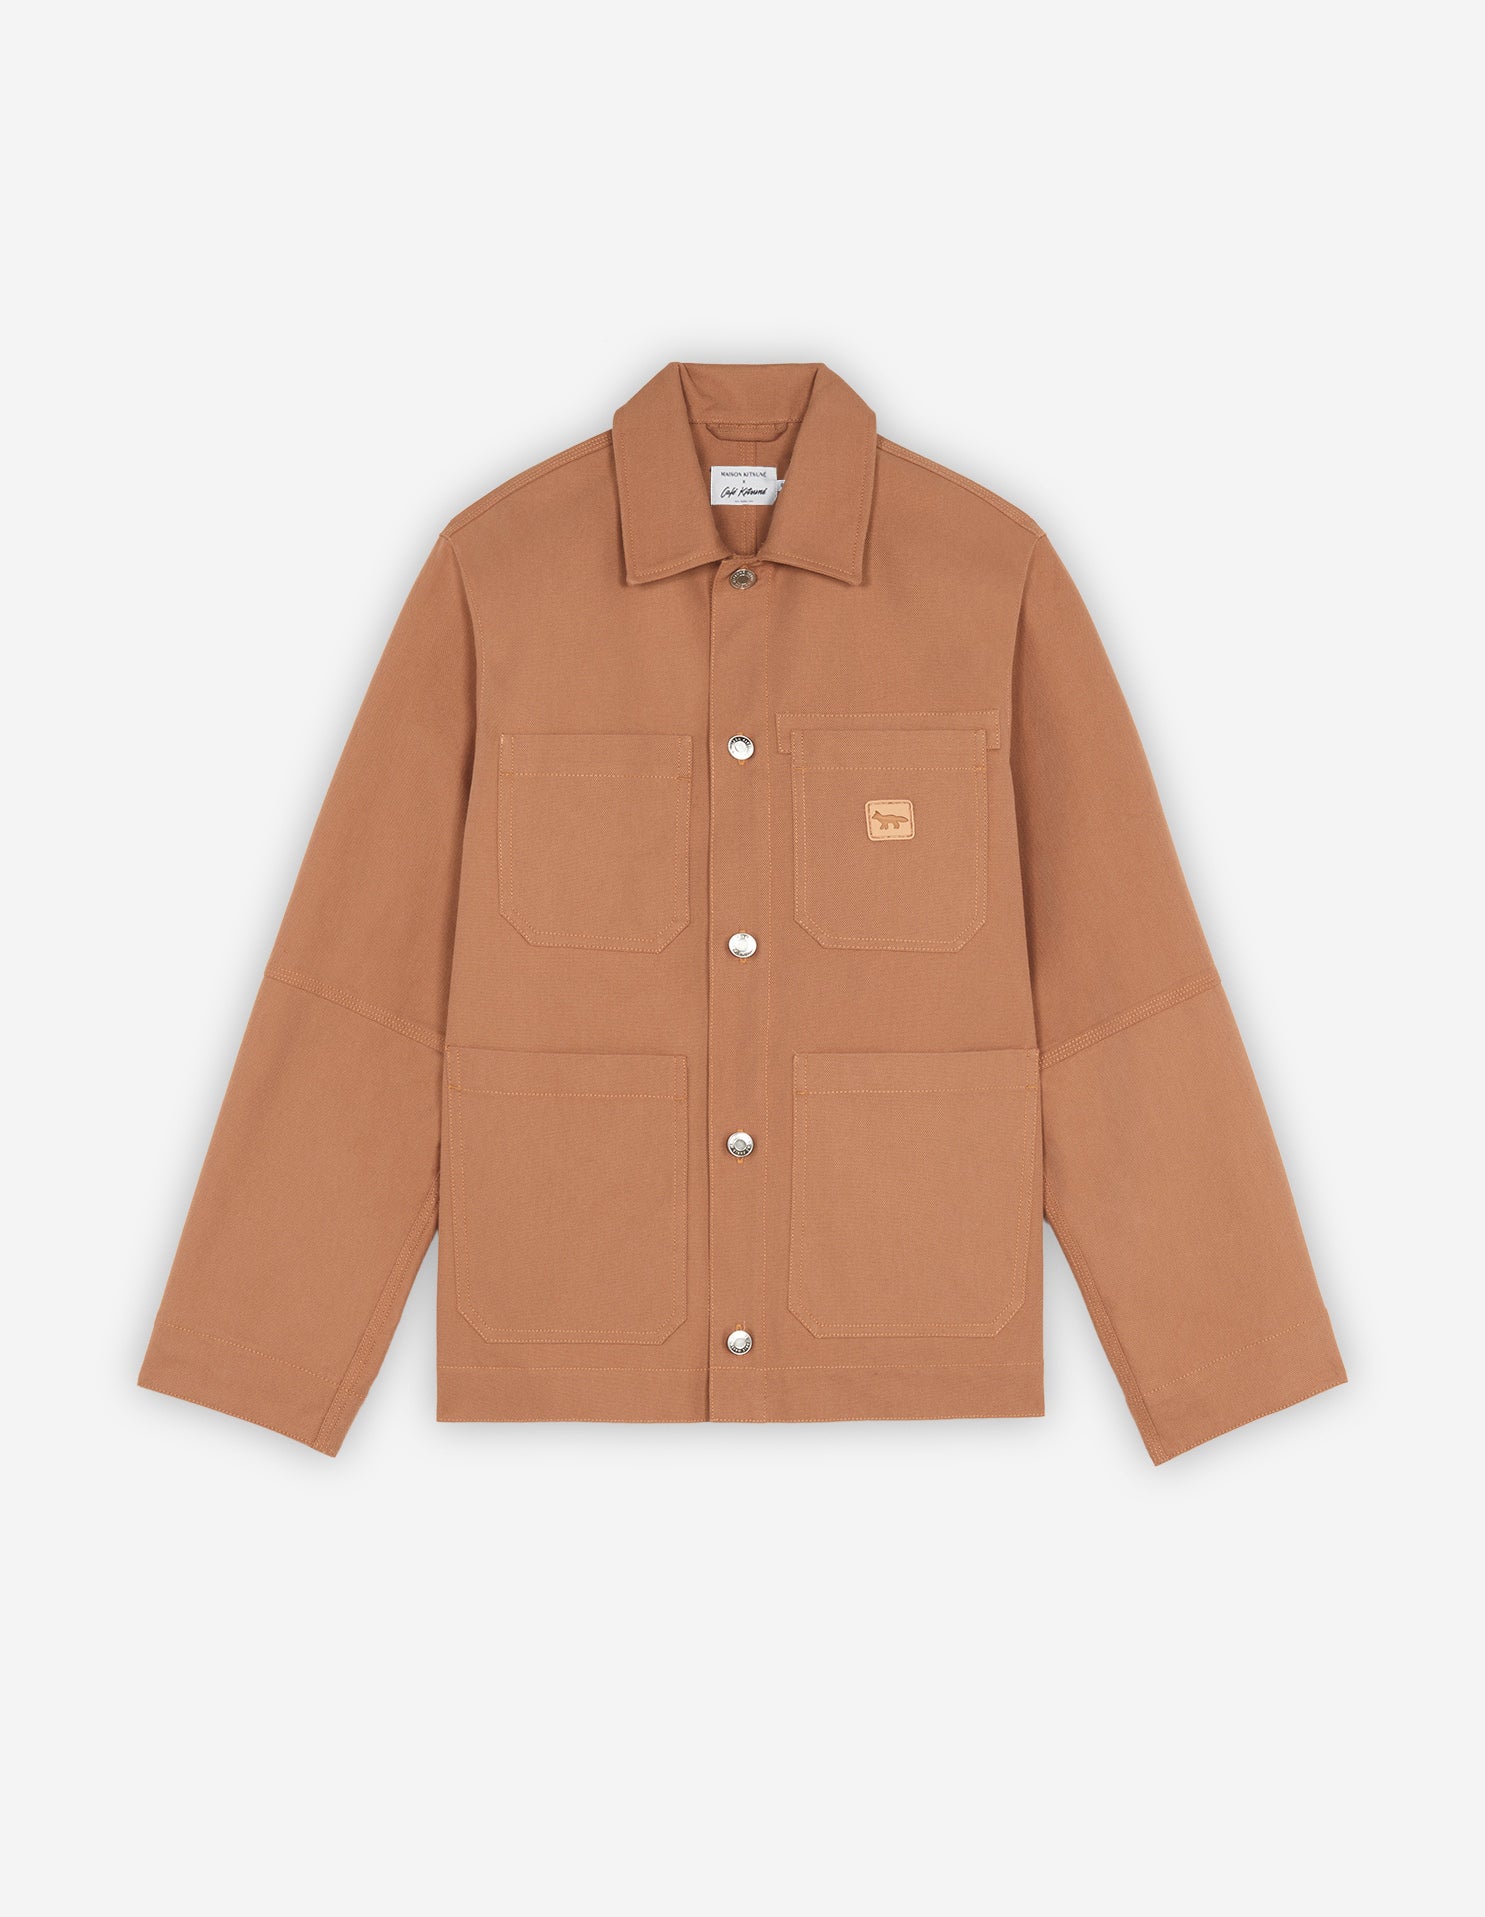 MAISON KITSUNÉ CAFE WORKWEAR JACKET IN CAPPUCCINO | Thred Men's ...